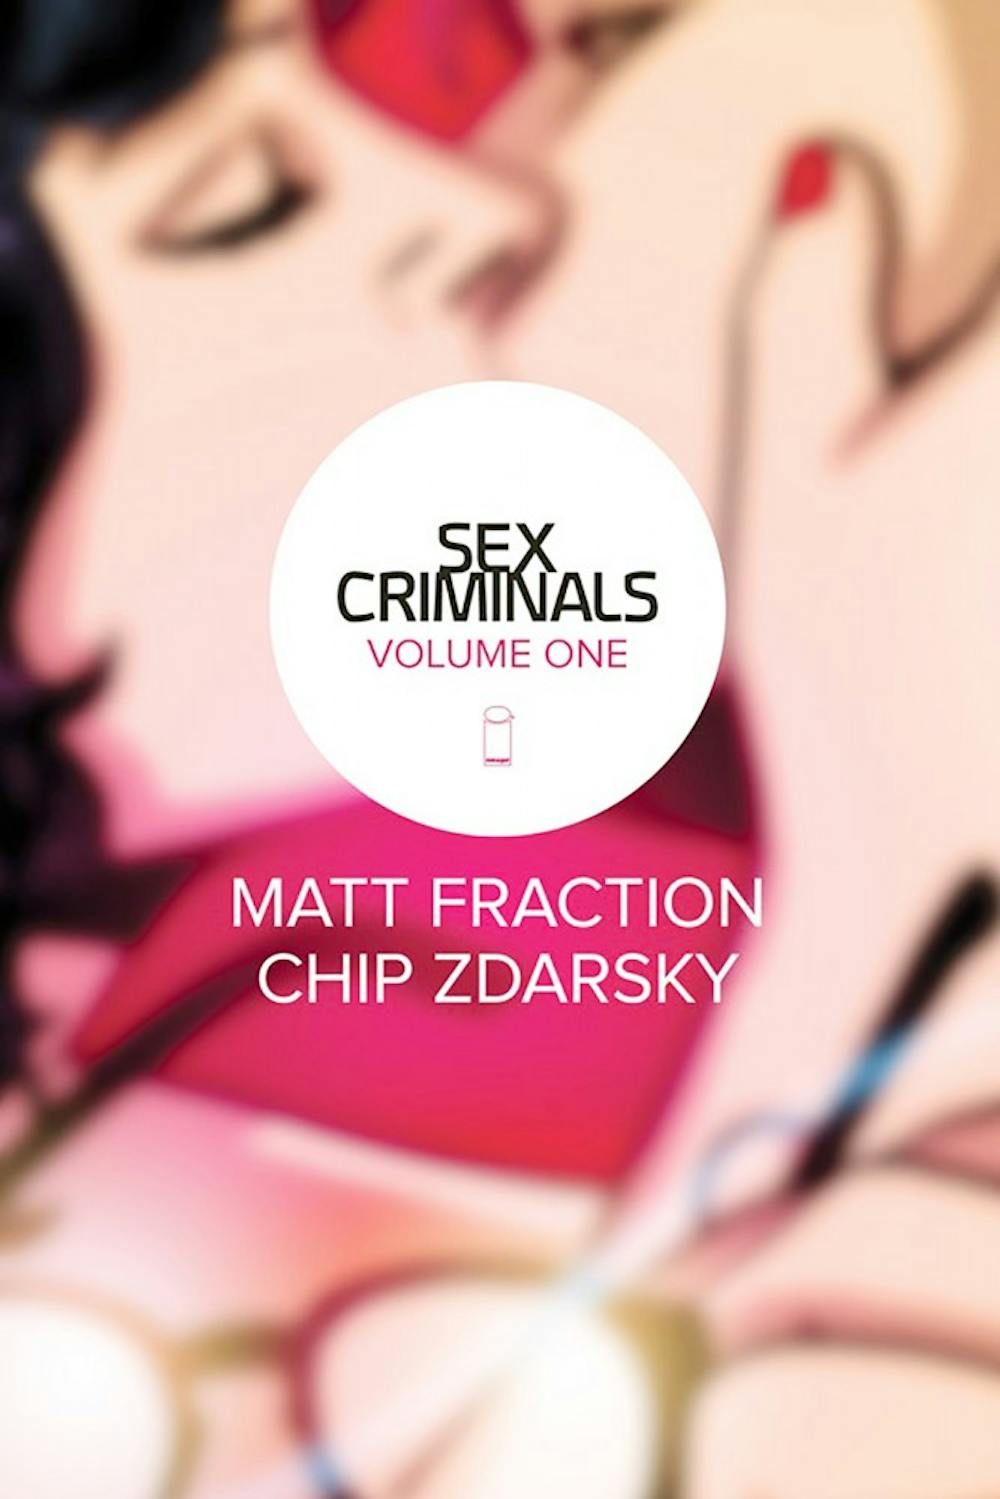 <p>Matt Fraction’s Sex Criminals series is a monthly publication centered around two characters with the ability to freeze time when they orgasm. Follow the adventures of these sexual time-travellers in their award-winning comic about sex.</p>